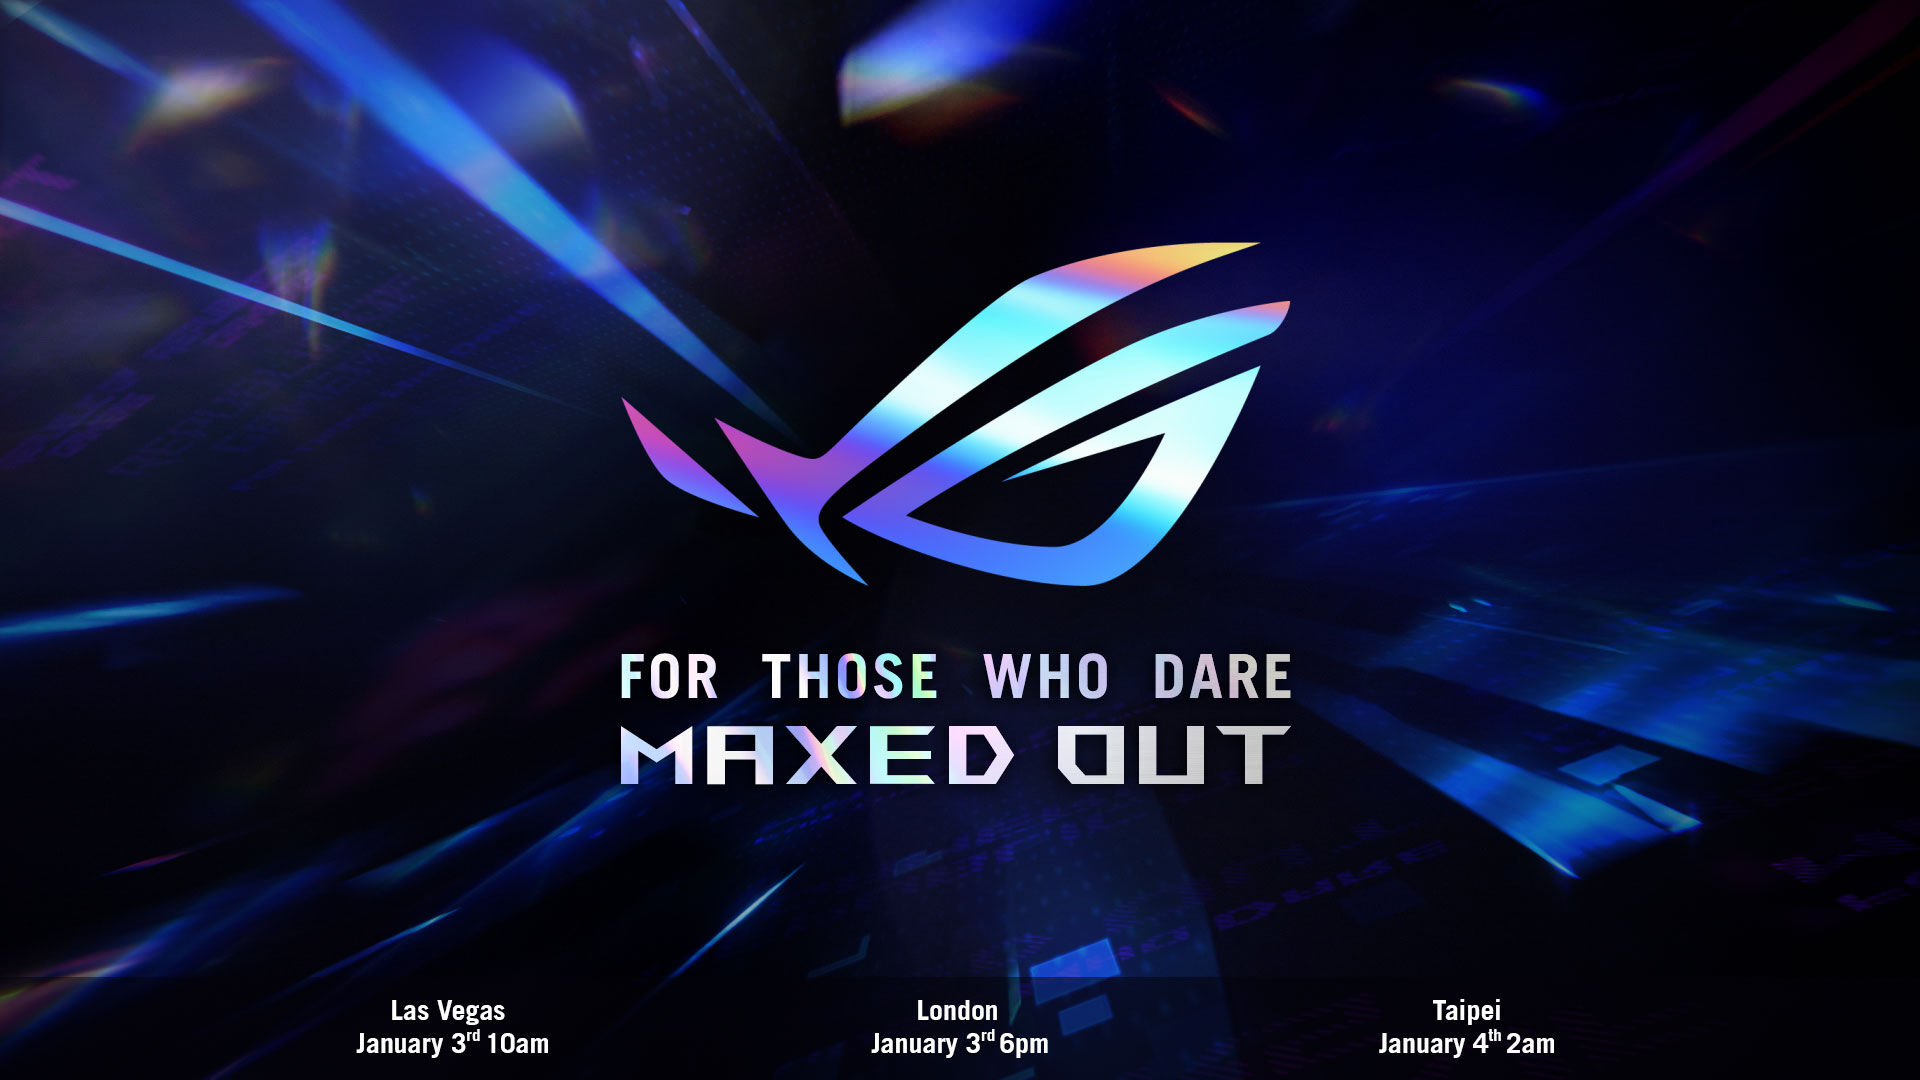 ASUS Announces For Those Who Dare: Maxed Out Virtual Event for CES